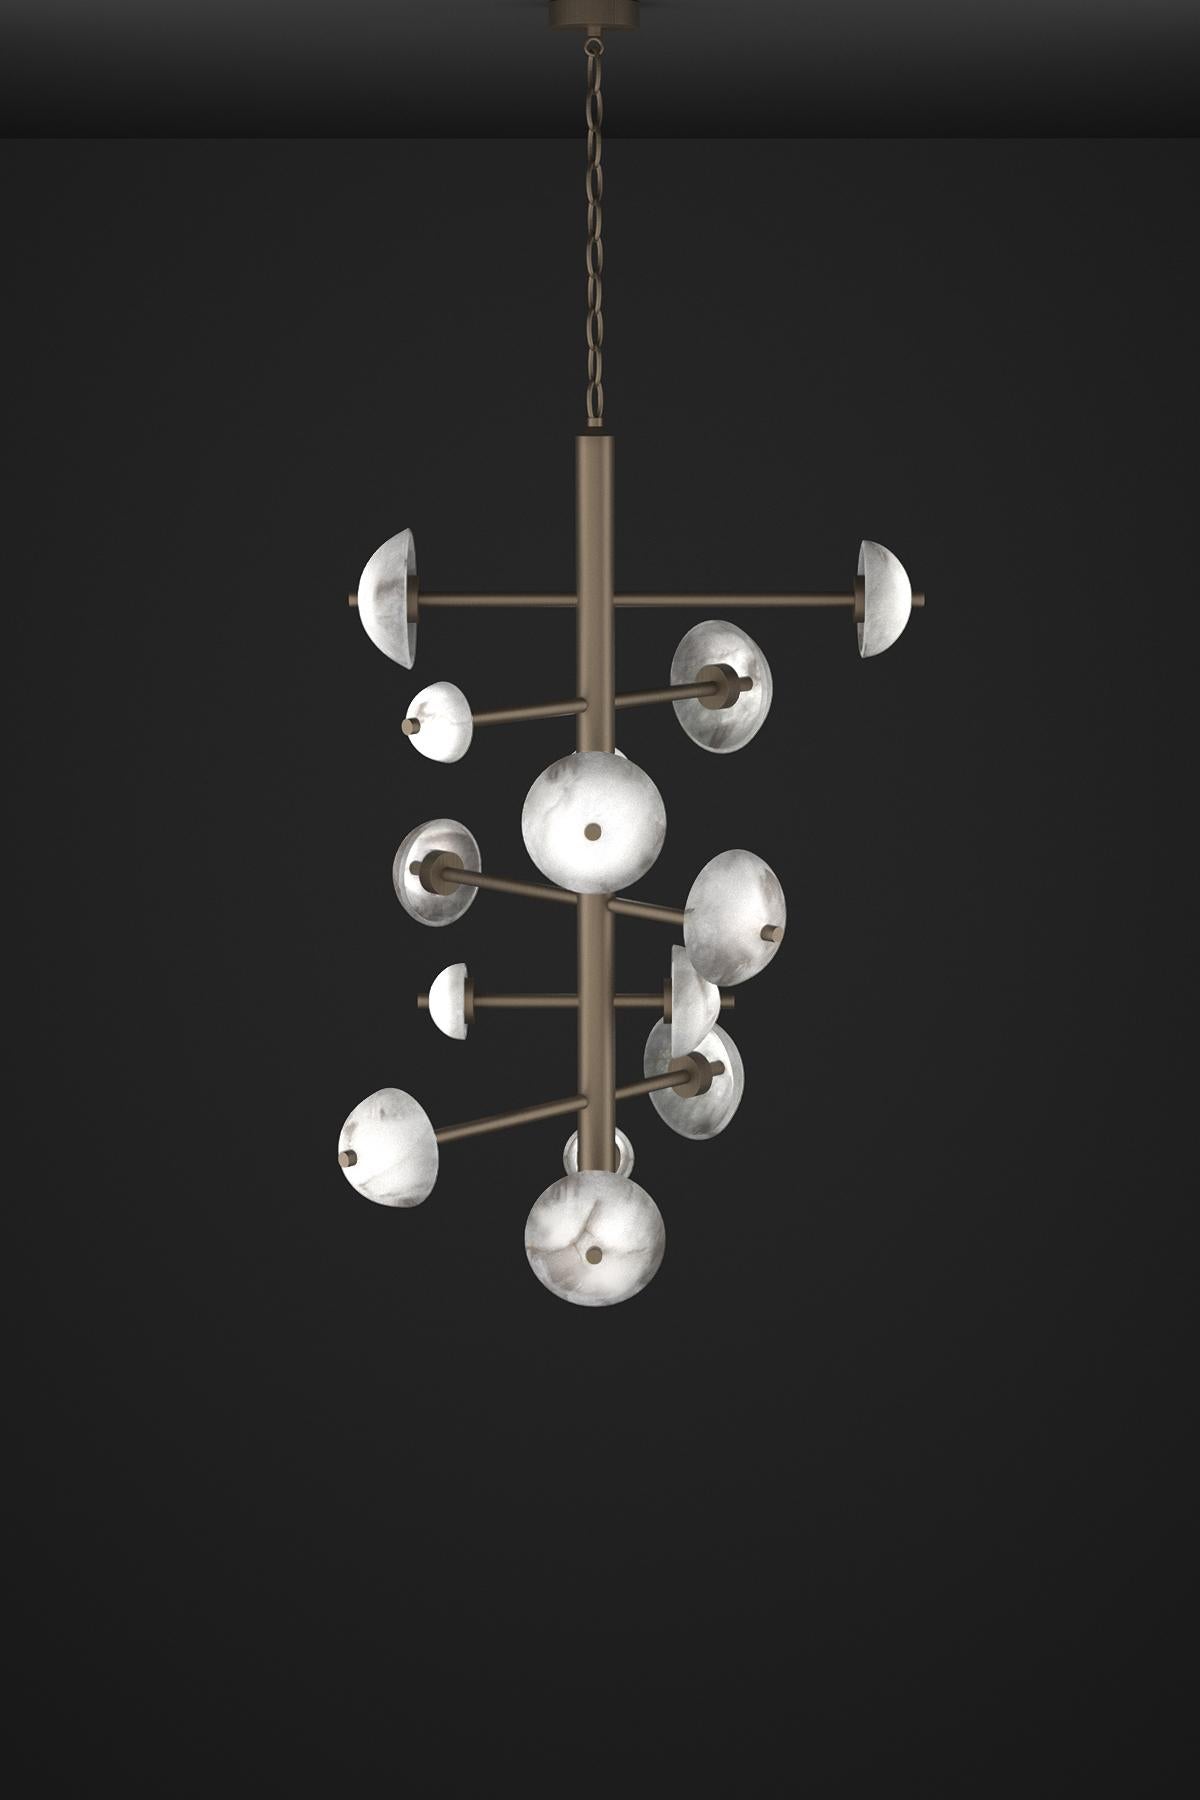 Apollo Brushed Burnished Metal Chandelier by Alabastro Italiano
Dimensions: D 70,5 x W 55 x H 111 cm.
Materials: White alabaster and metal.

Available in different finishes: Shiny Silver, Bronze, Brushed Brass, Ruggine of Florence, Brushed